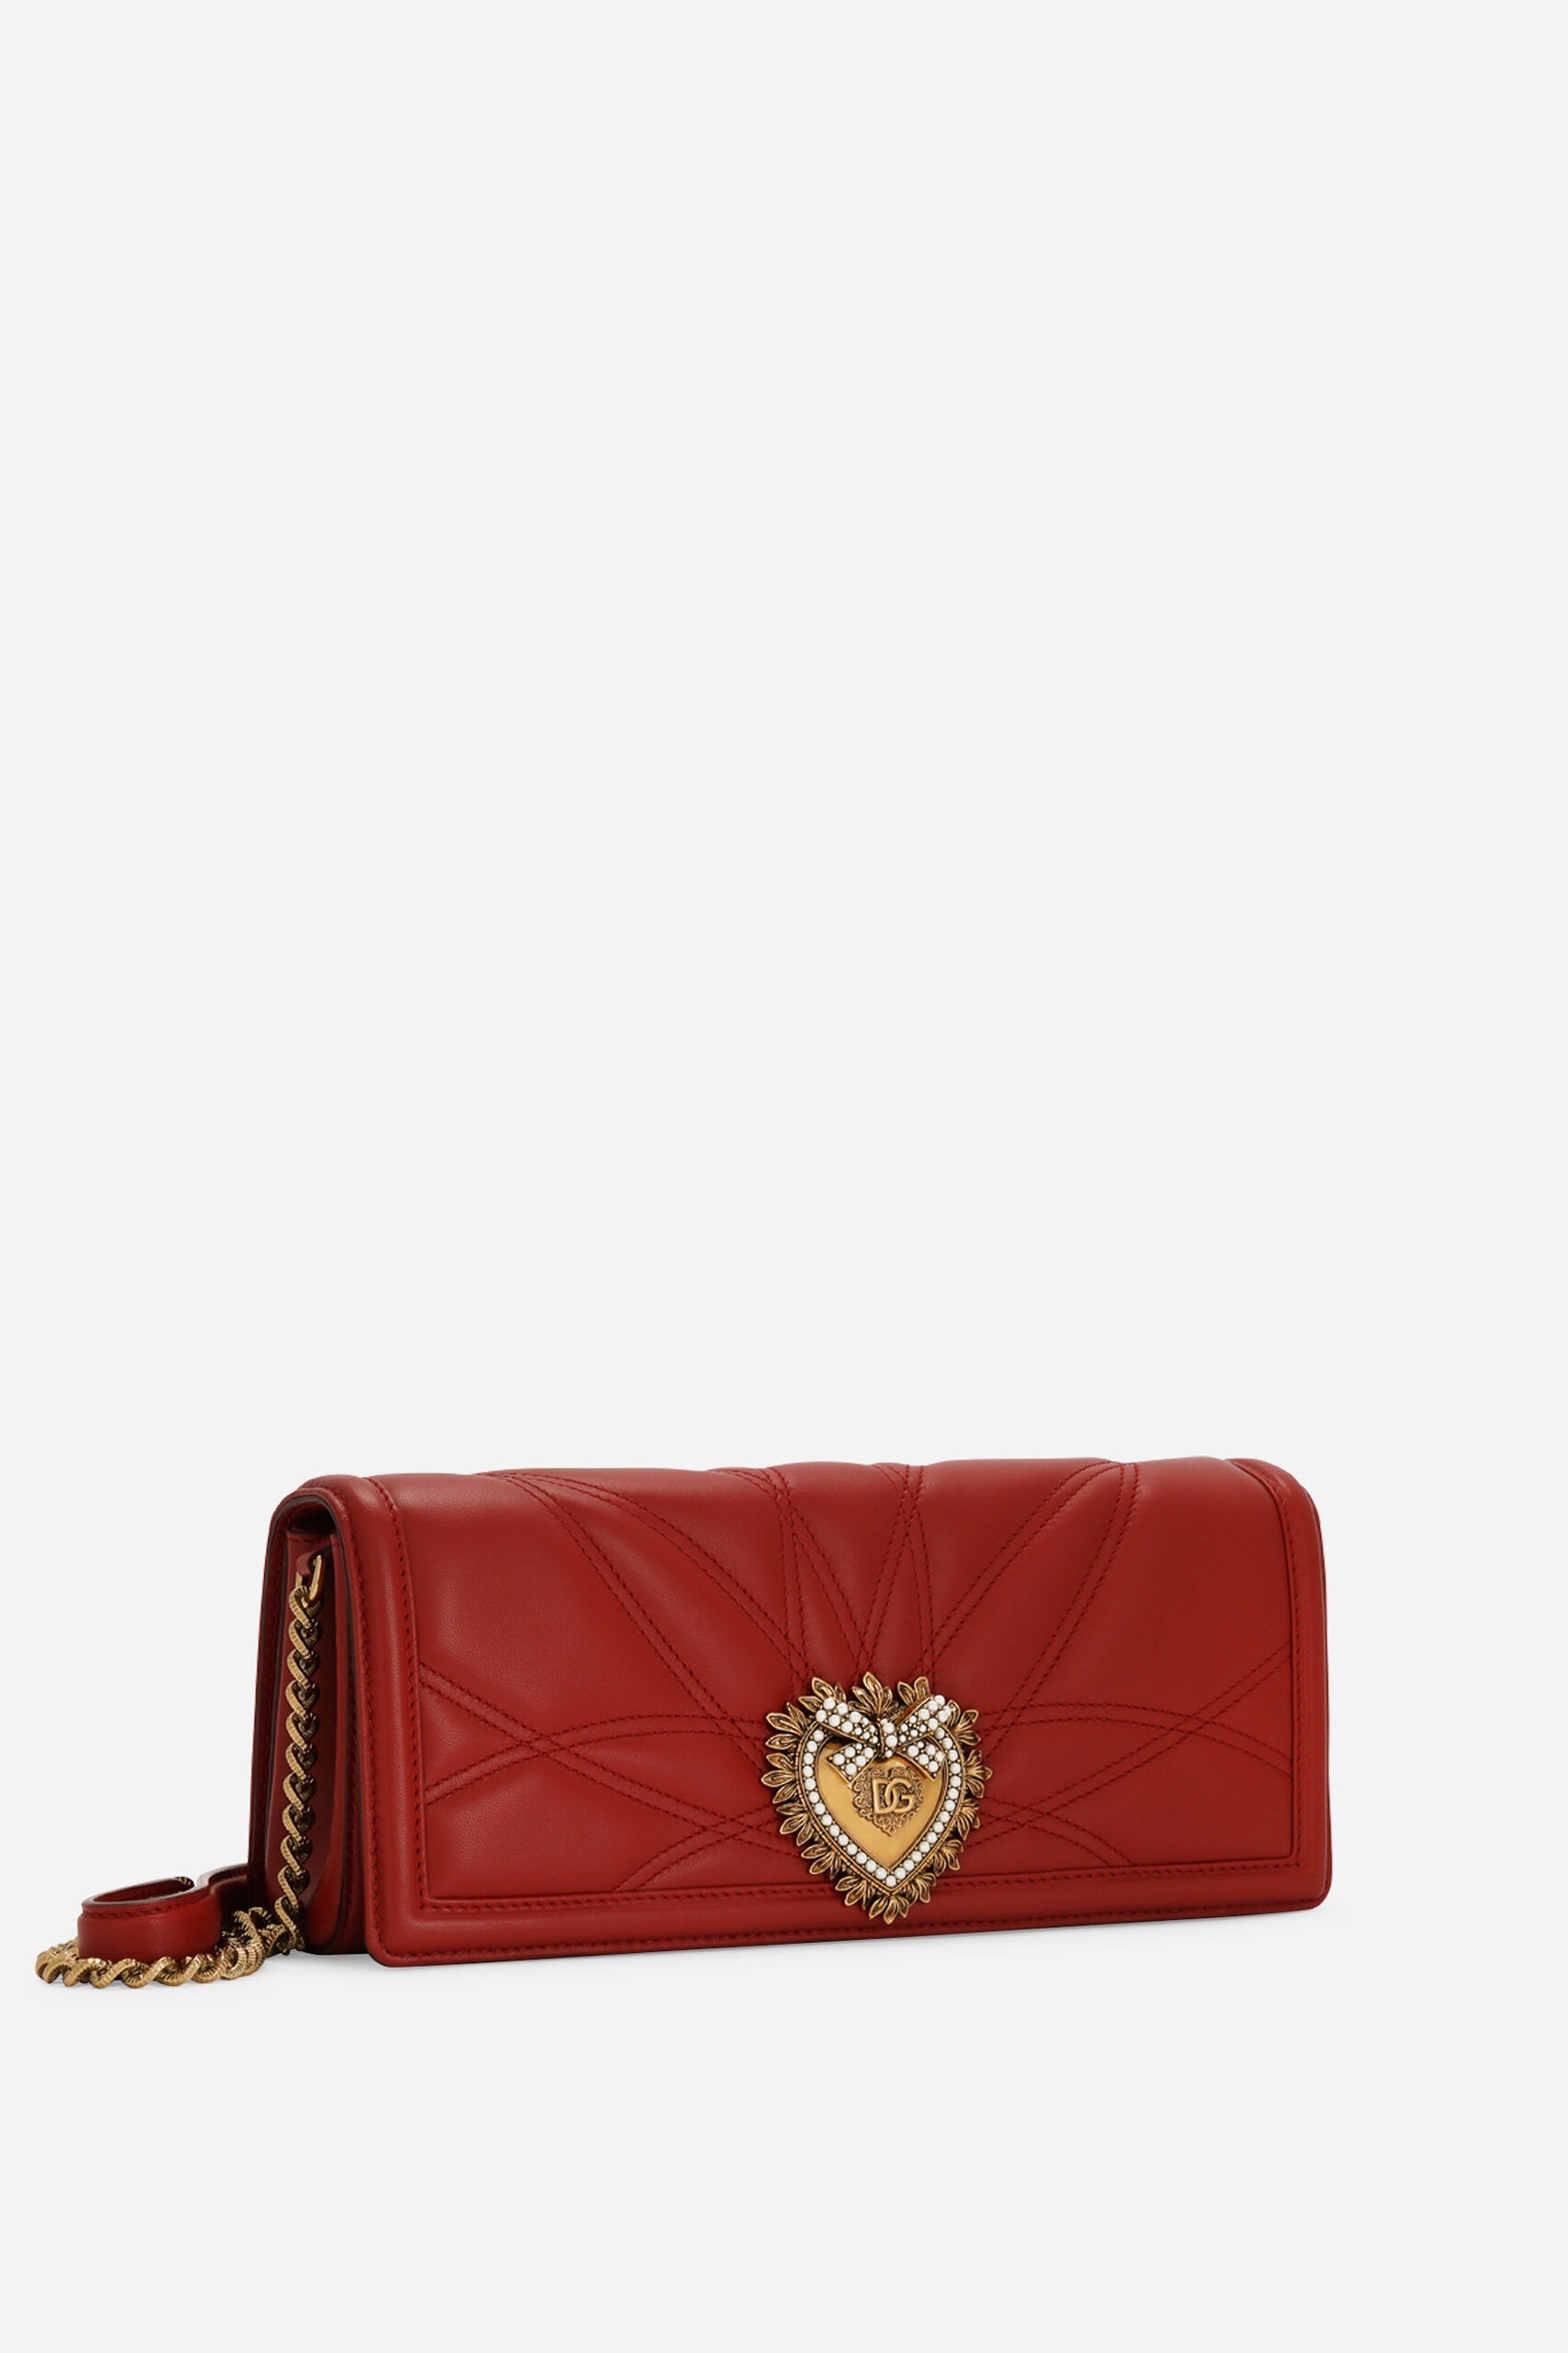 QUILTED NAPPA LEATHER DEVOTION BAGUETTE BAG - Red